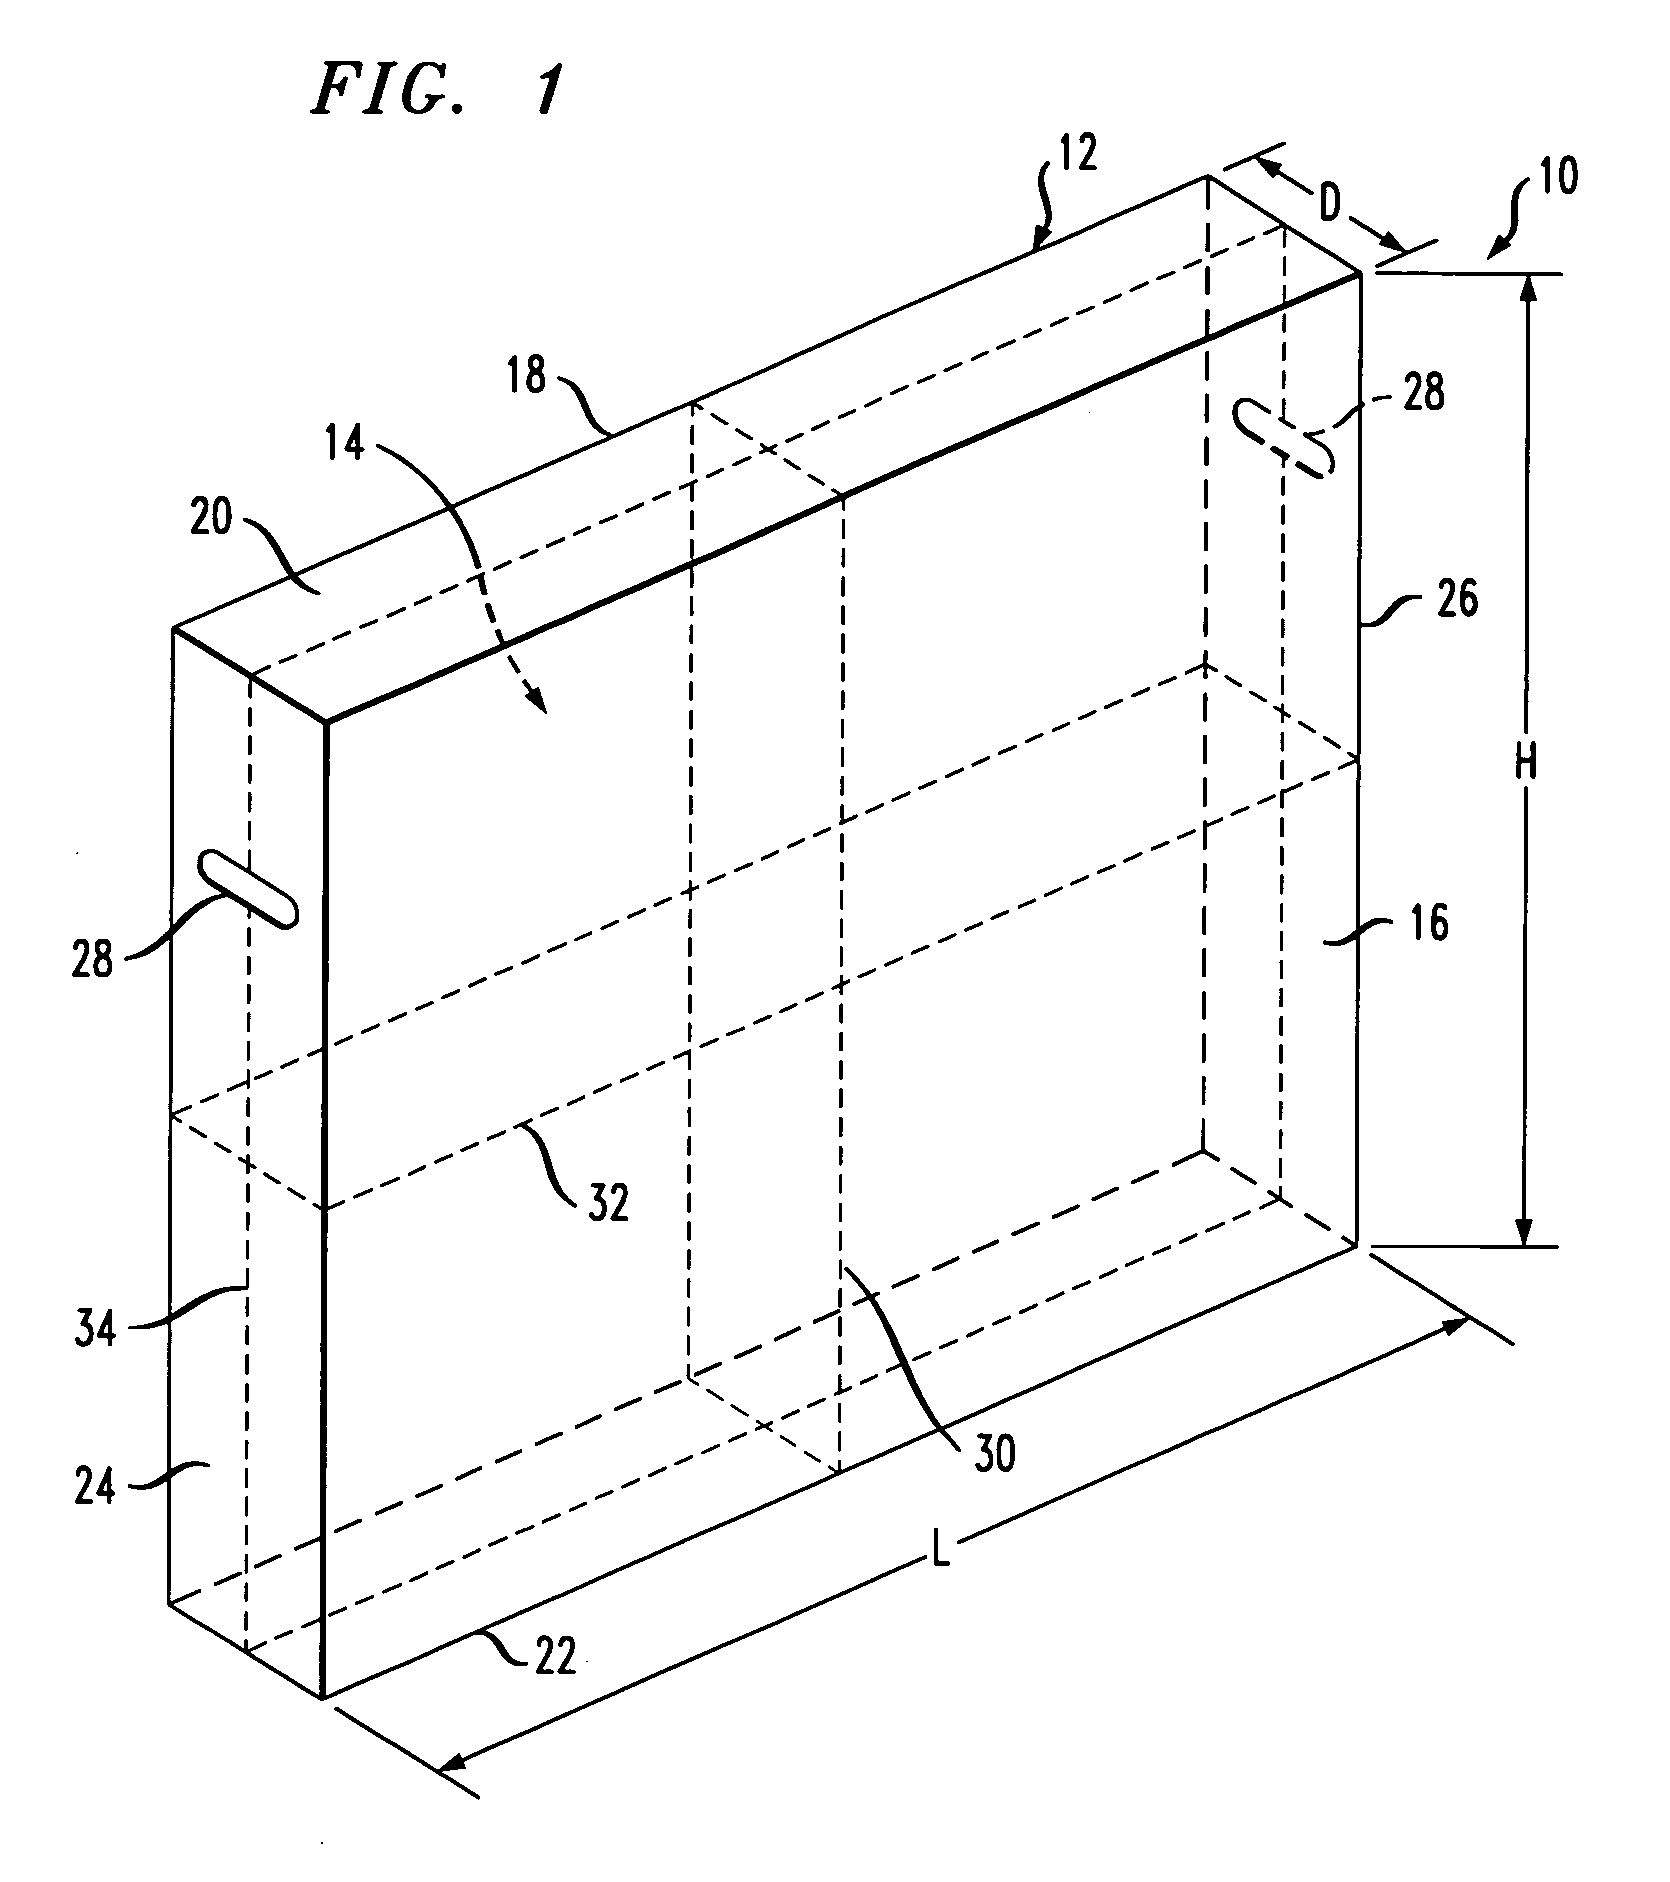 Packaging system for carrying an item, preferably bulky and/or heavy items, and method for using the same